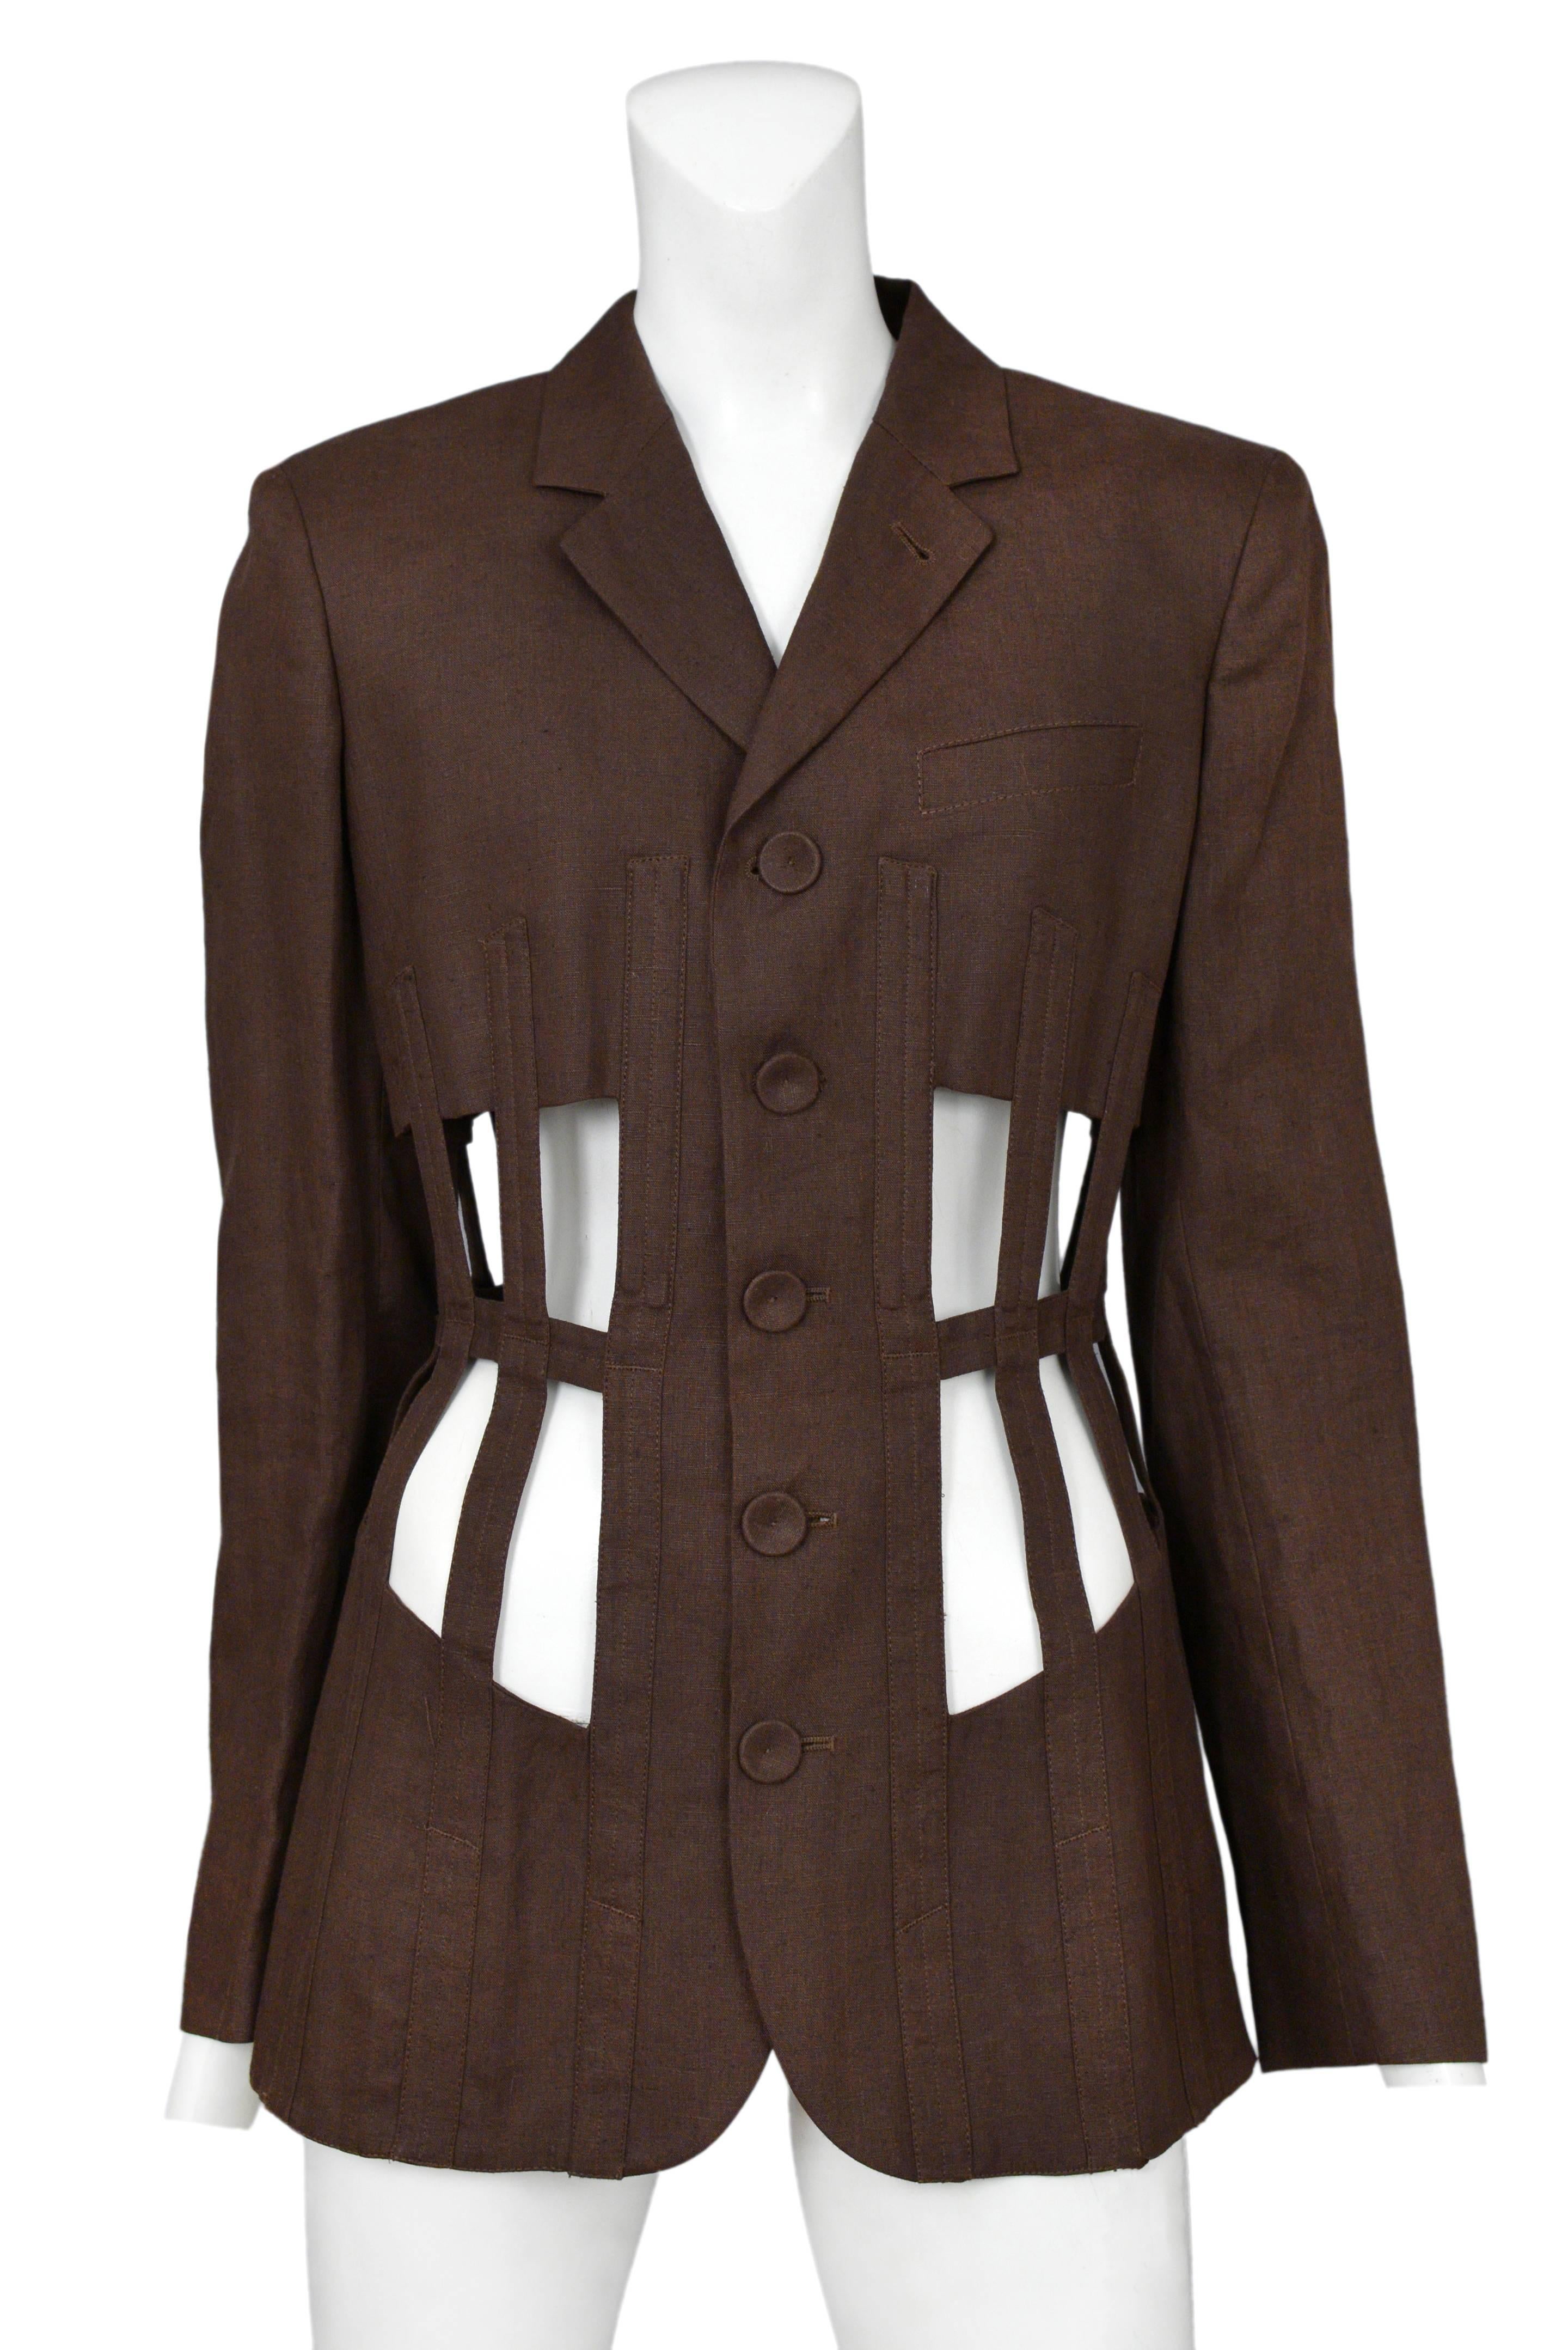 Vintage Jean Paul Gaultier iconic brown cage jacket featuring covered buttons up the front, lingerie style lace up corset closure at the back and exposed faux boning at the waist. Circa Autumn / Winter 1989.
Please inquire for additional images.